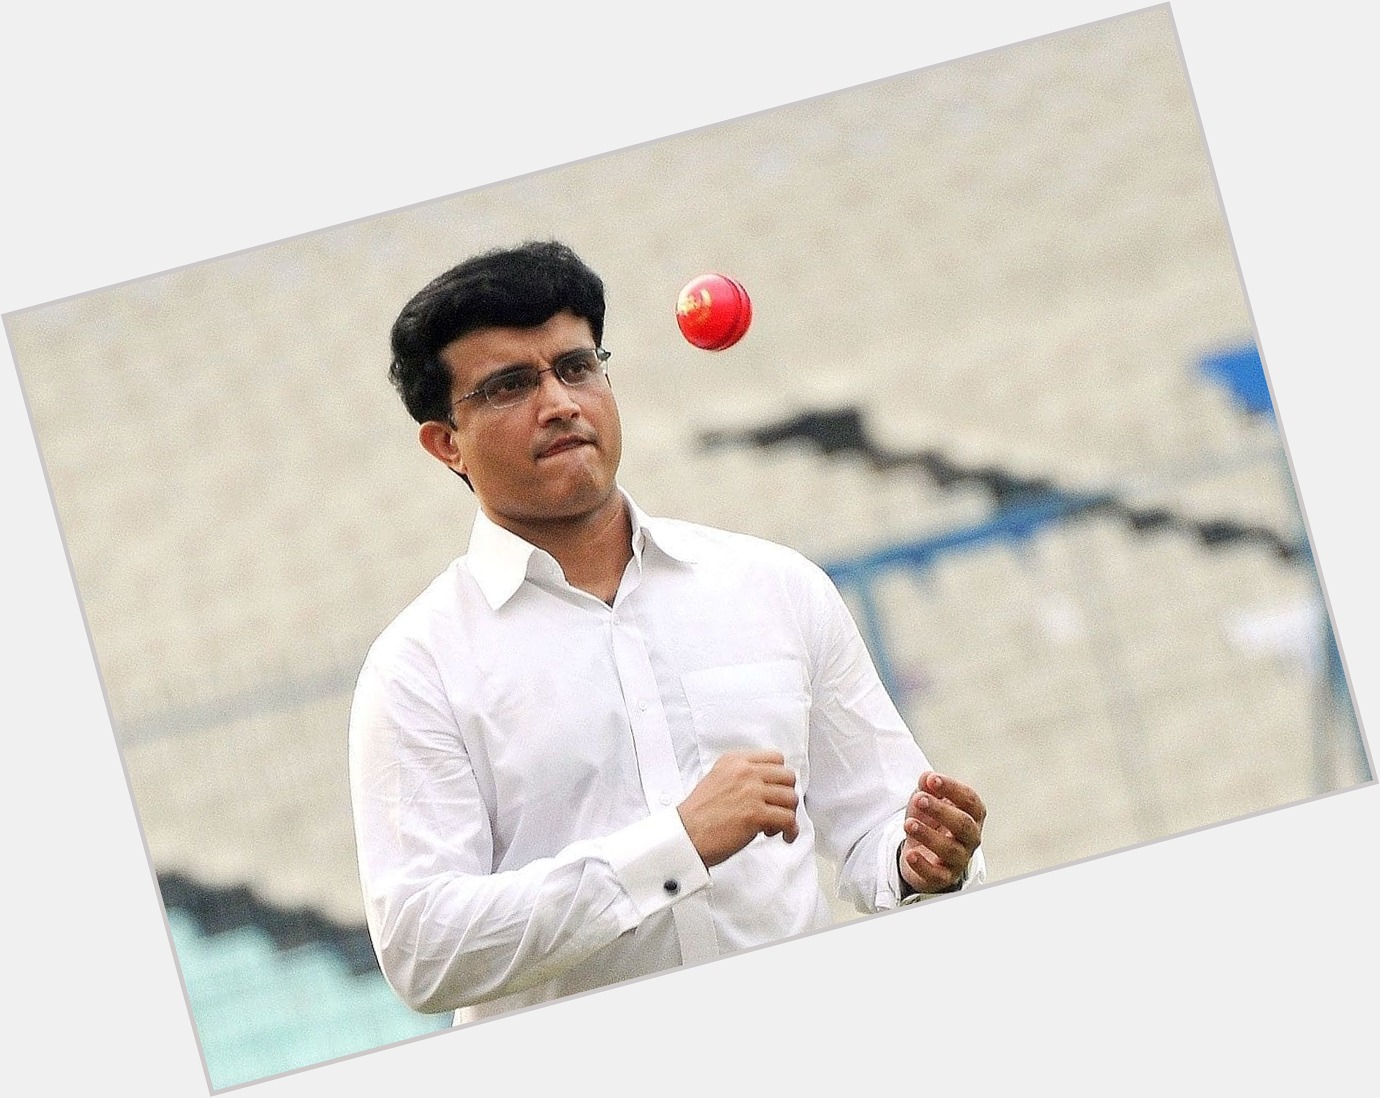 Happy Birthday to our former captain and current cricket administrator Ganguly. 